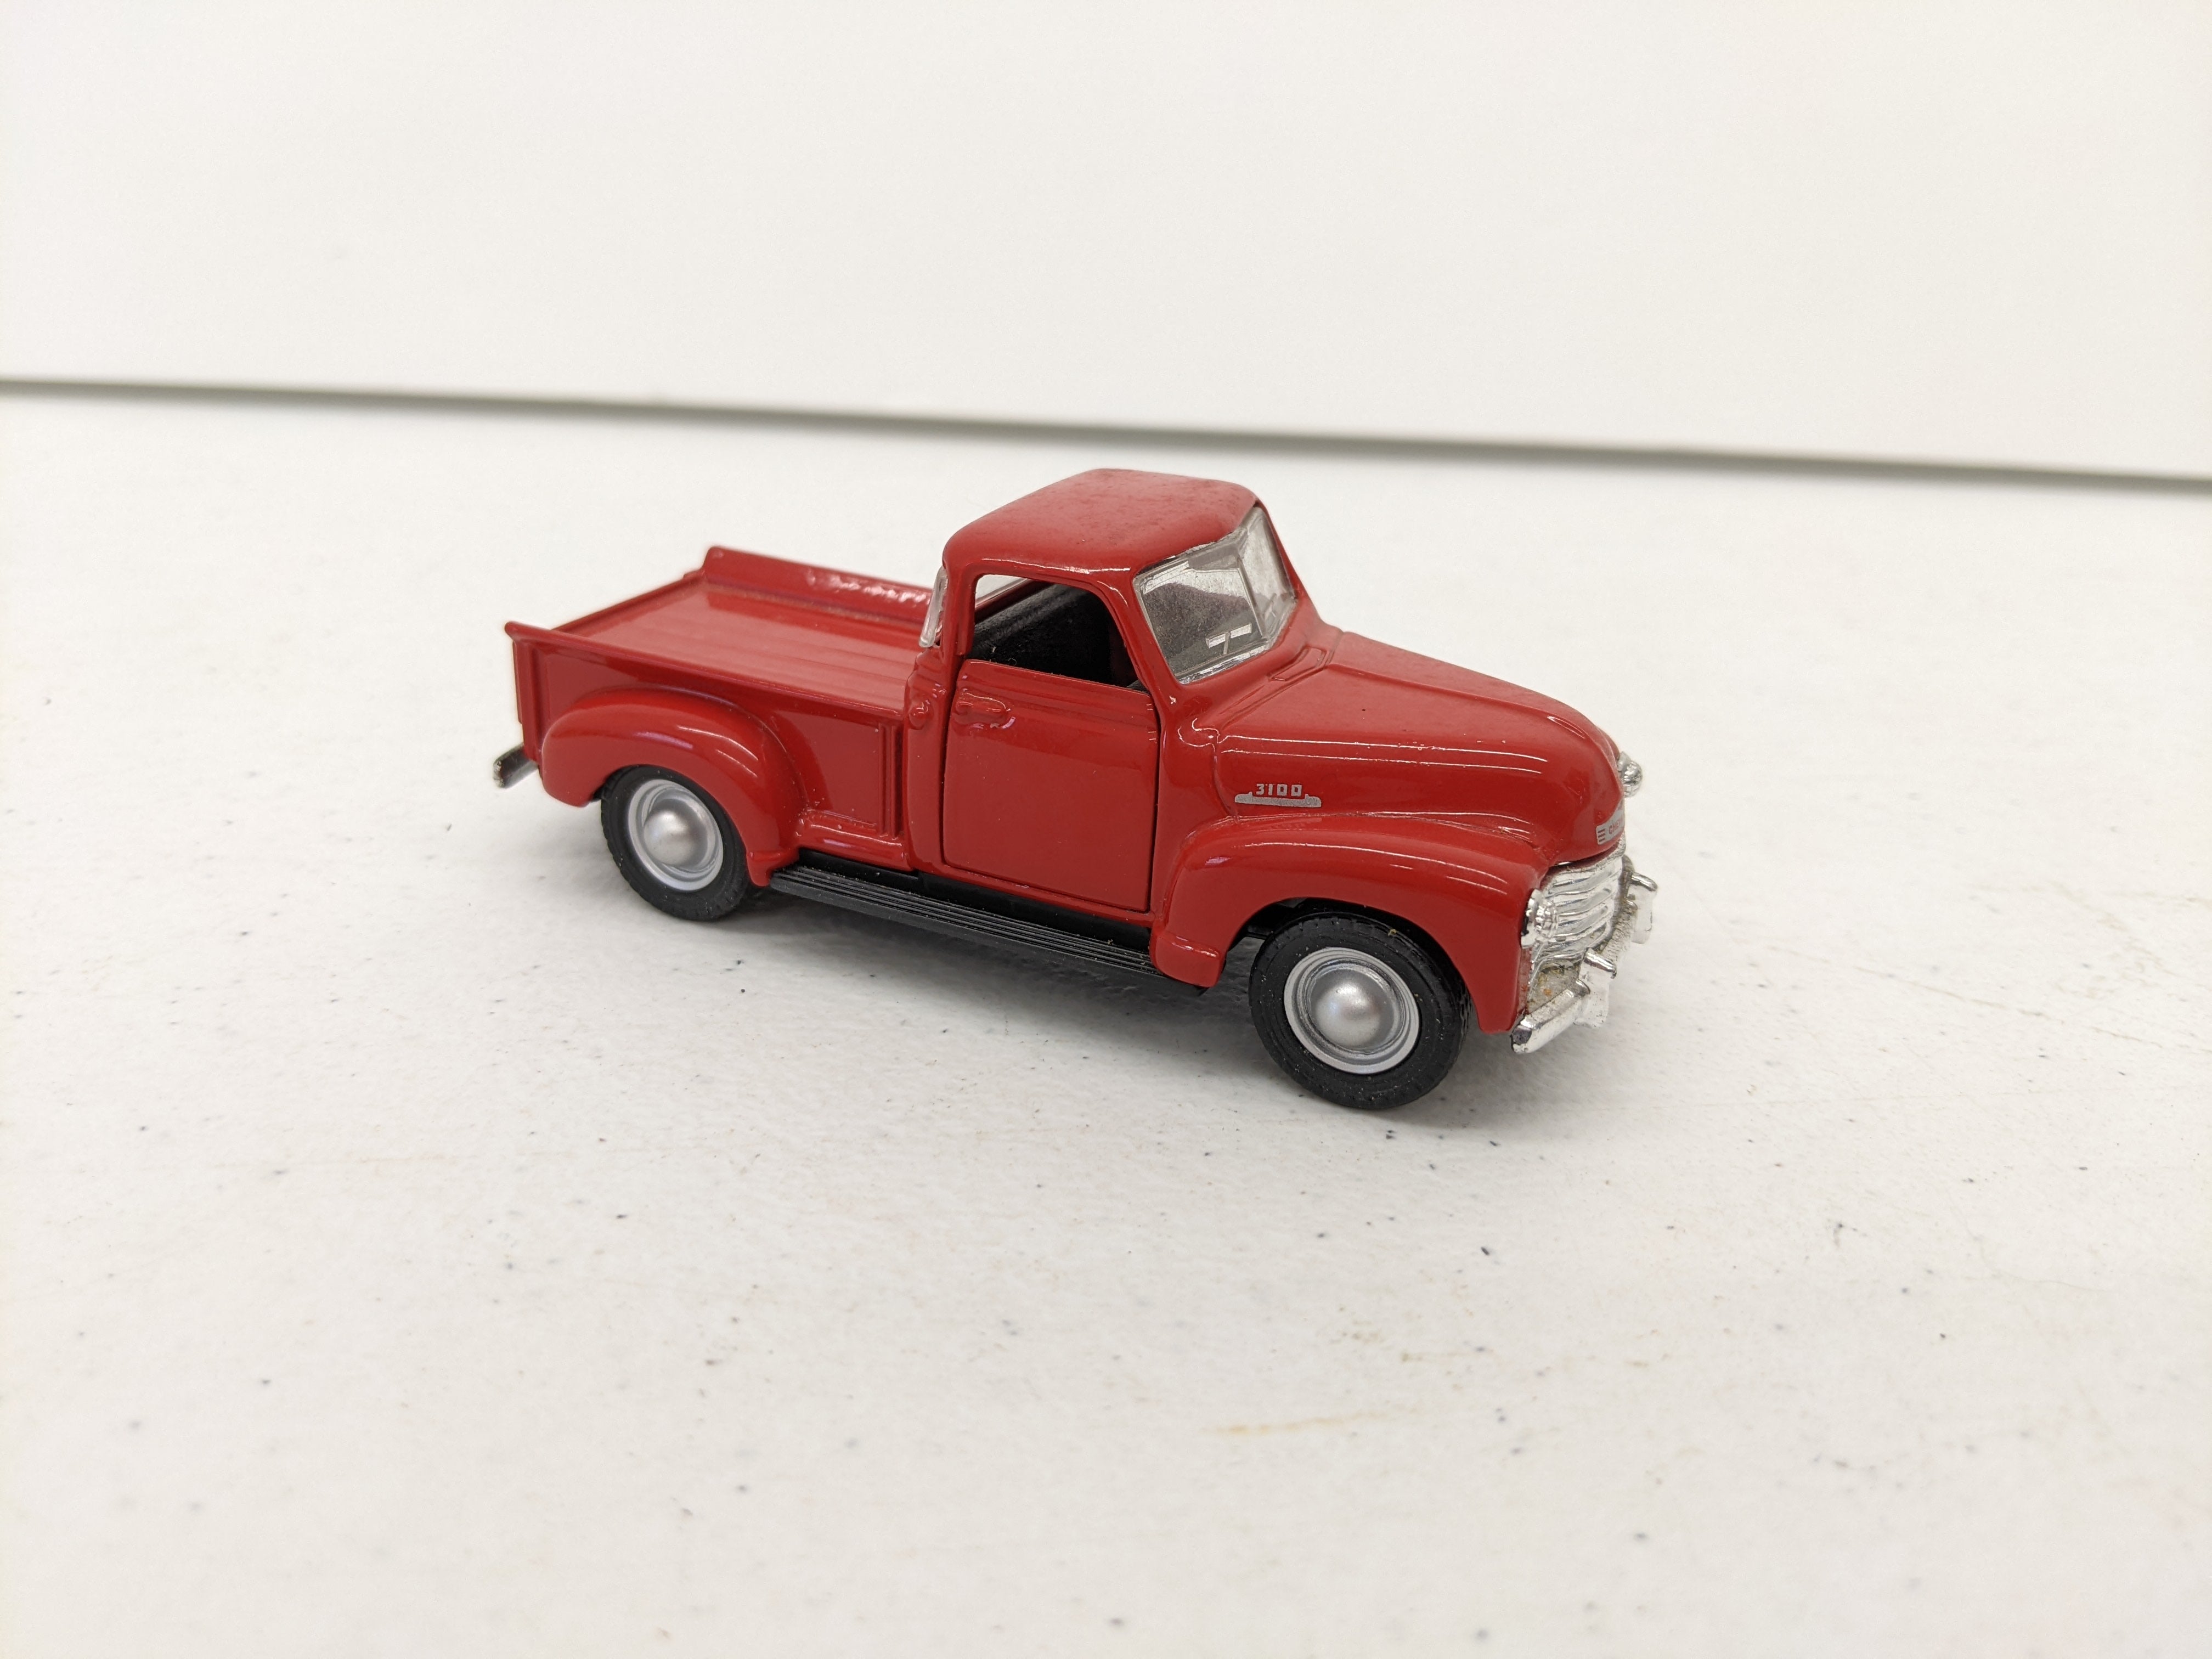 USED Maisto O Scale, Maisto 1948 Ford F-1 Pickup Truck, Red, 1/36 Scale